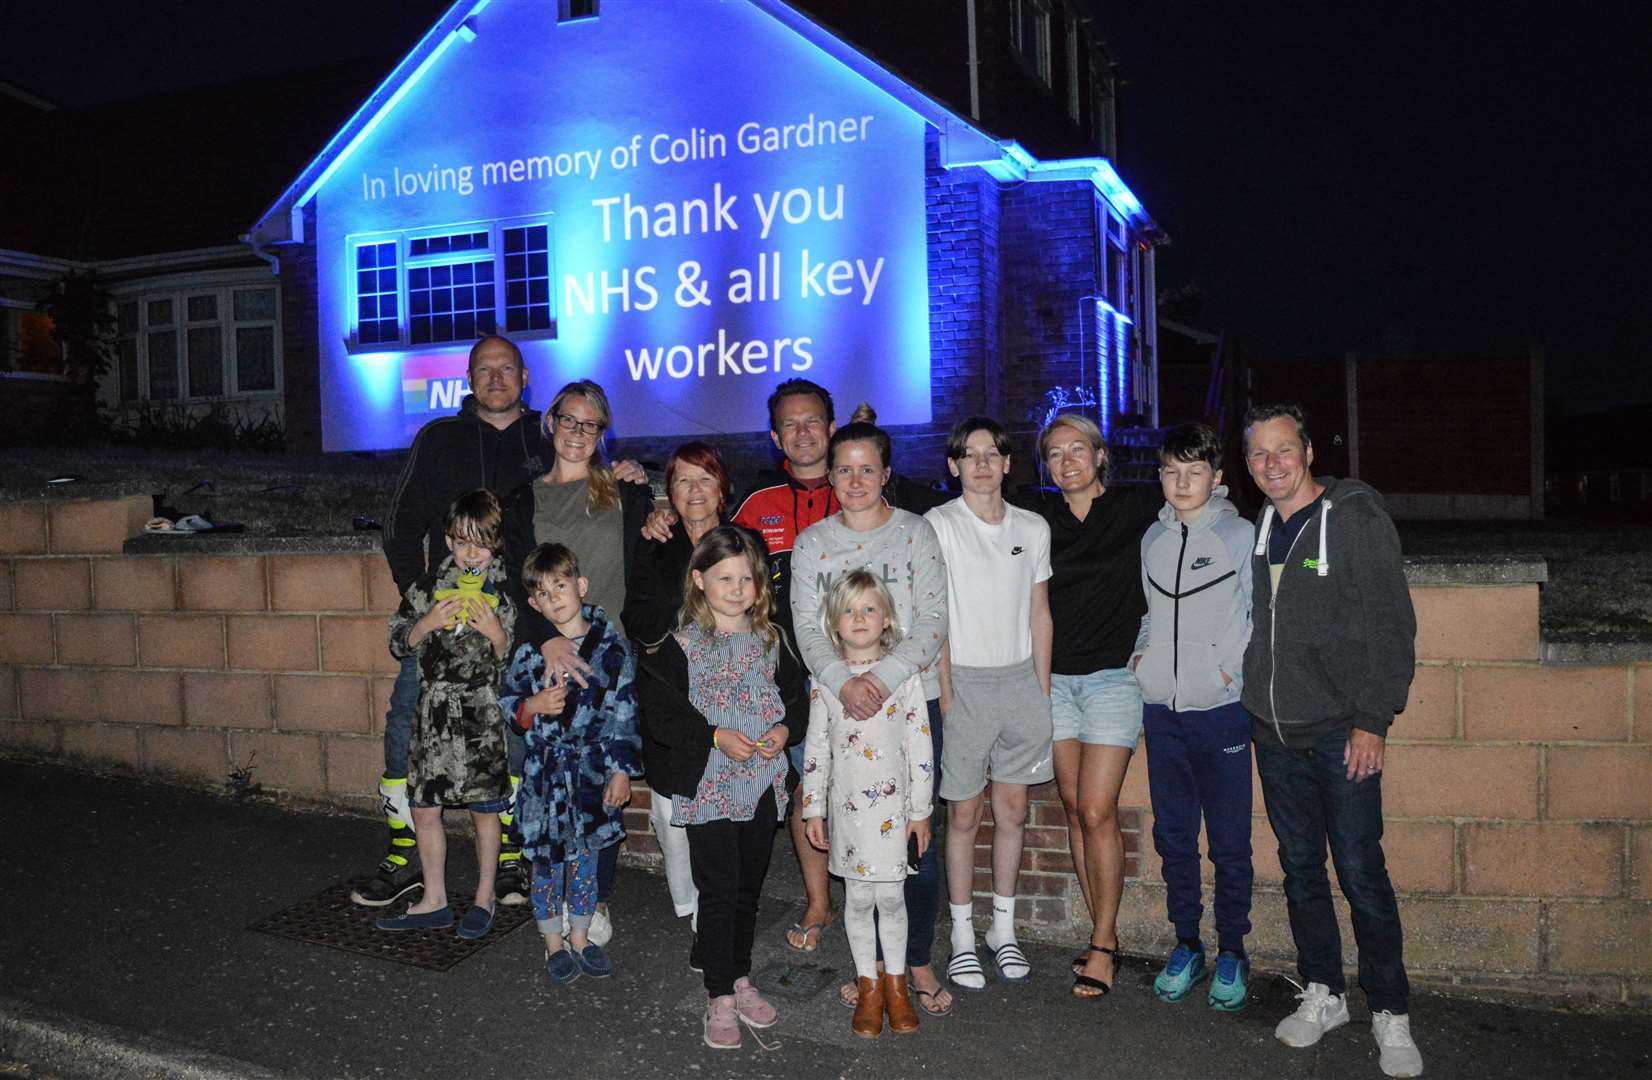 LTSE Production lit up a house in Cuxton as a thank you to the NHS and all key workers. Also in memory of Colin Gardner who recently passed away. Picture: LSTE Productions